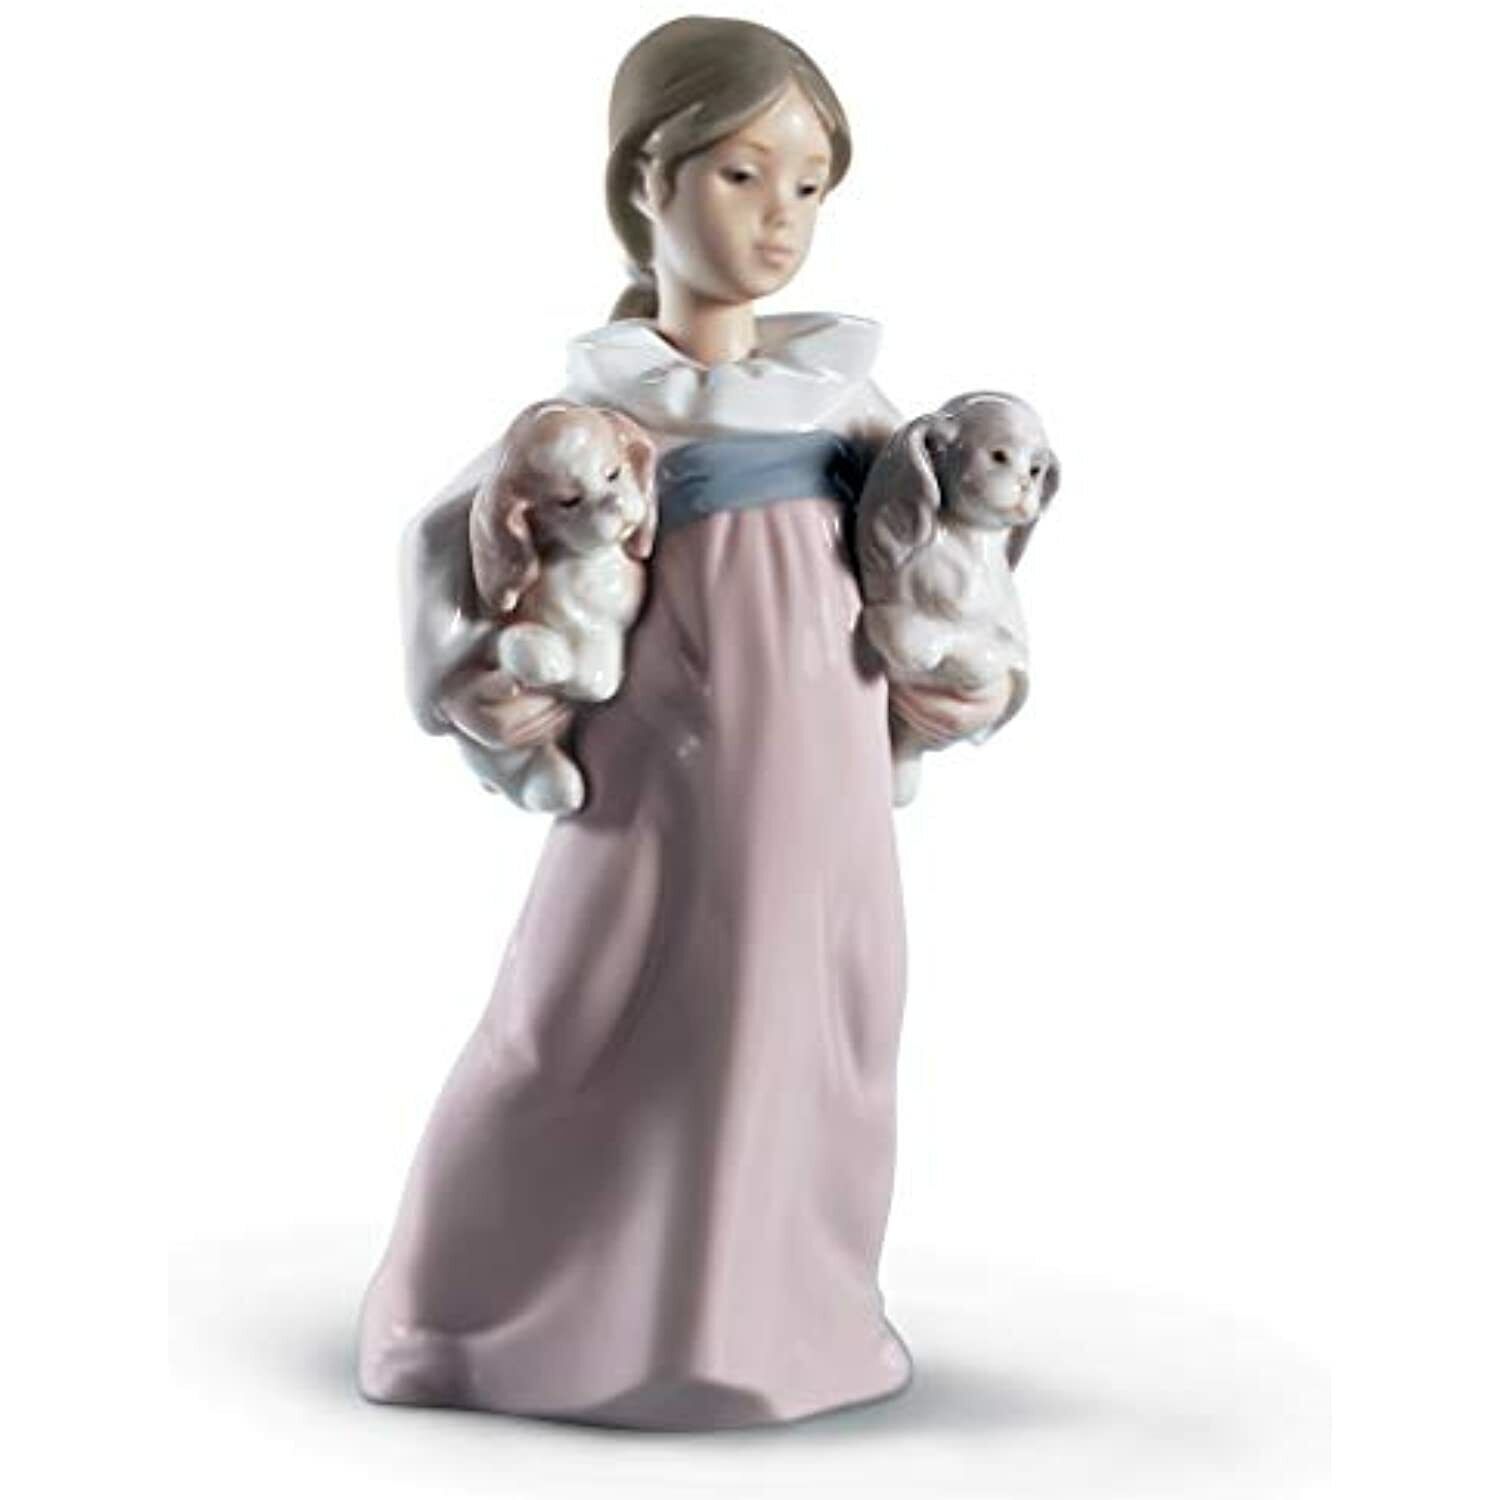 LLADRÓ Lladro Arms Full of Love Figurine Porcelain Girl Puppies Figure 01006419